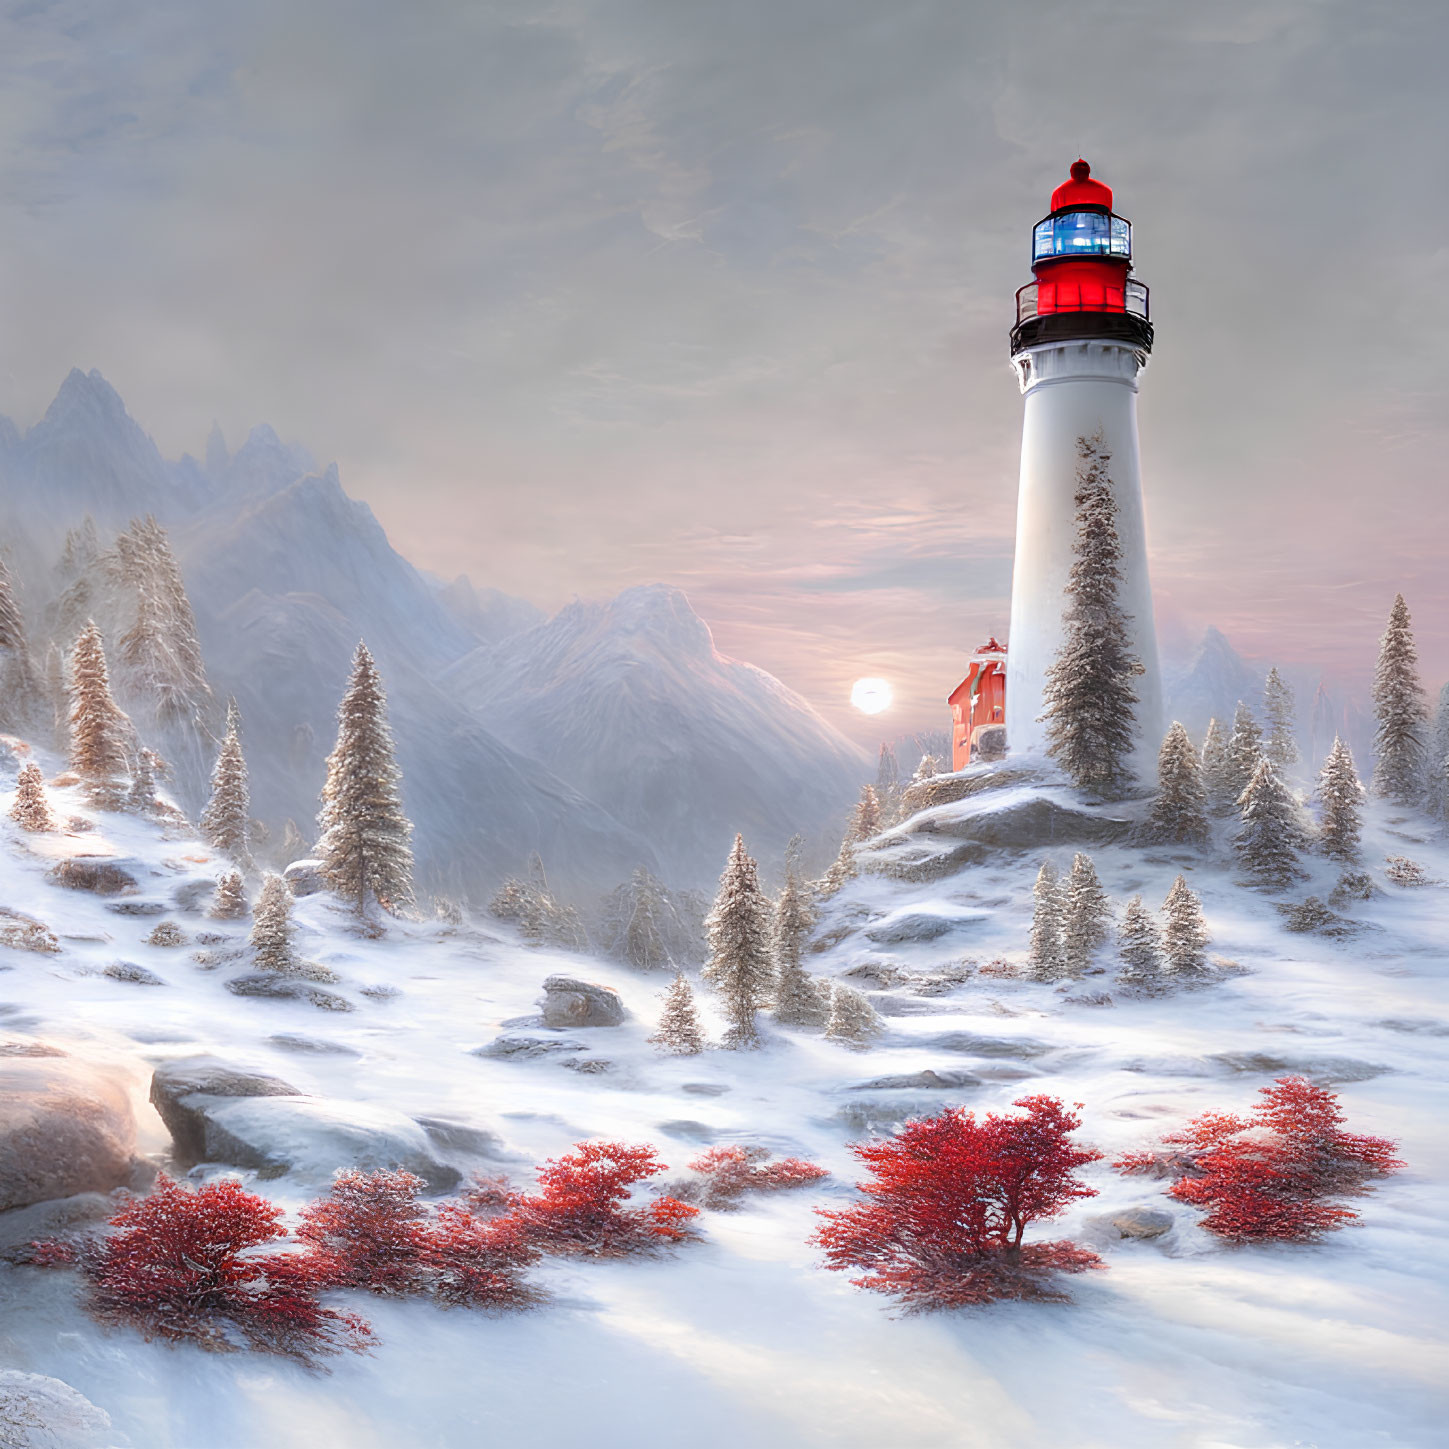 Snowy Winter Landscape: White Lighthouse, Red Accents, Snow-Covered Trees